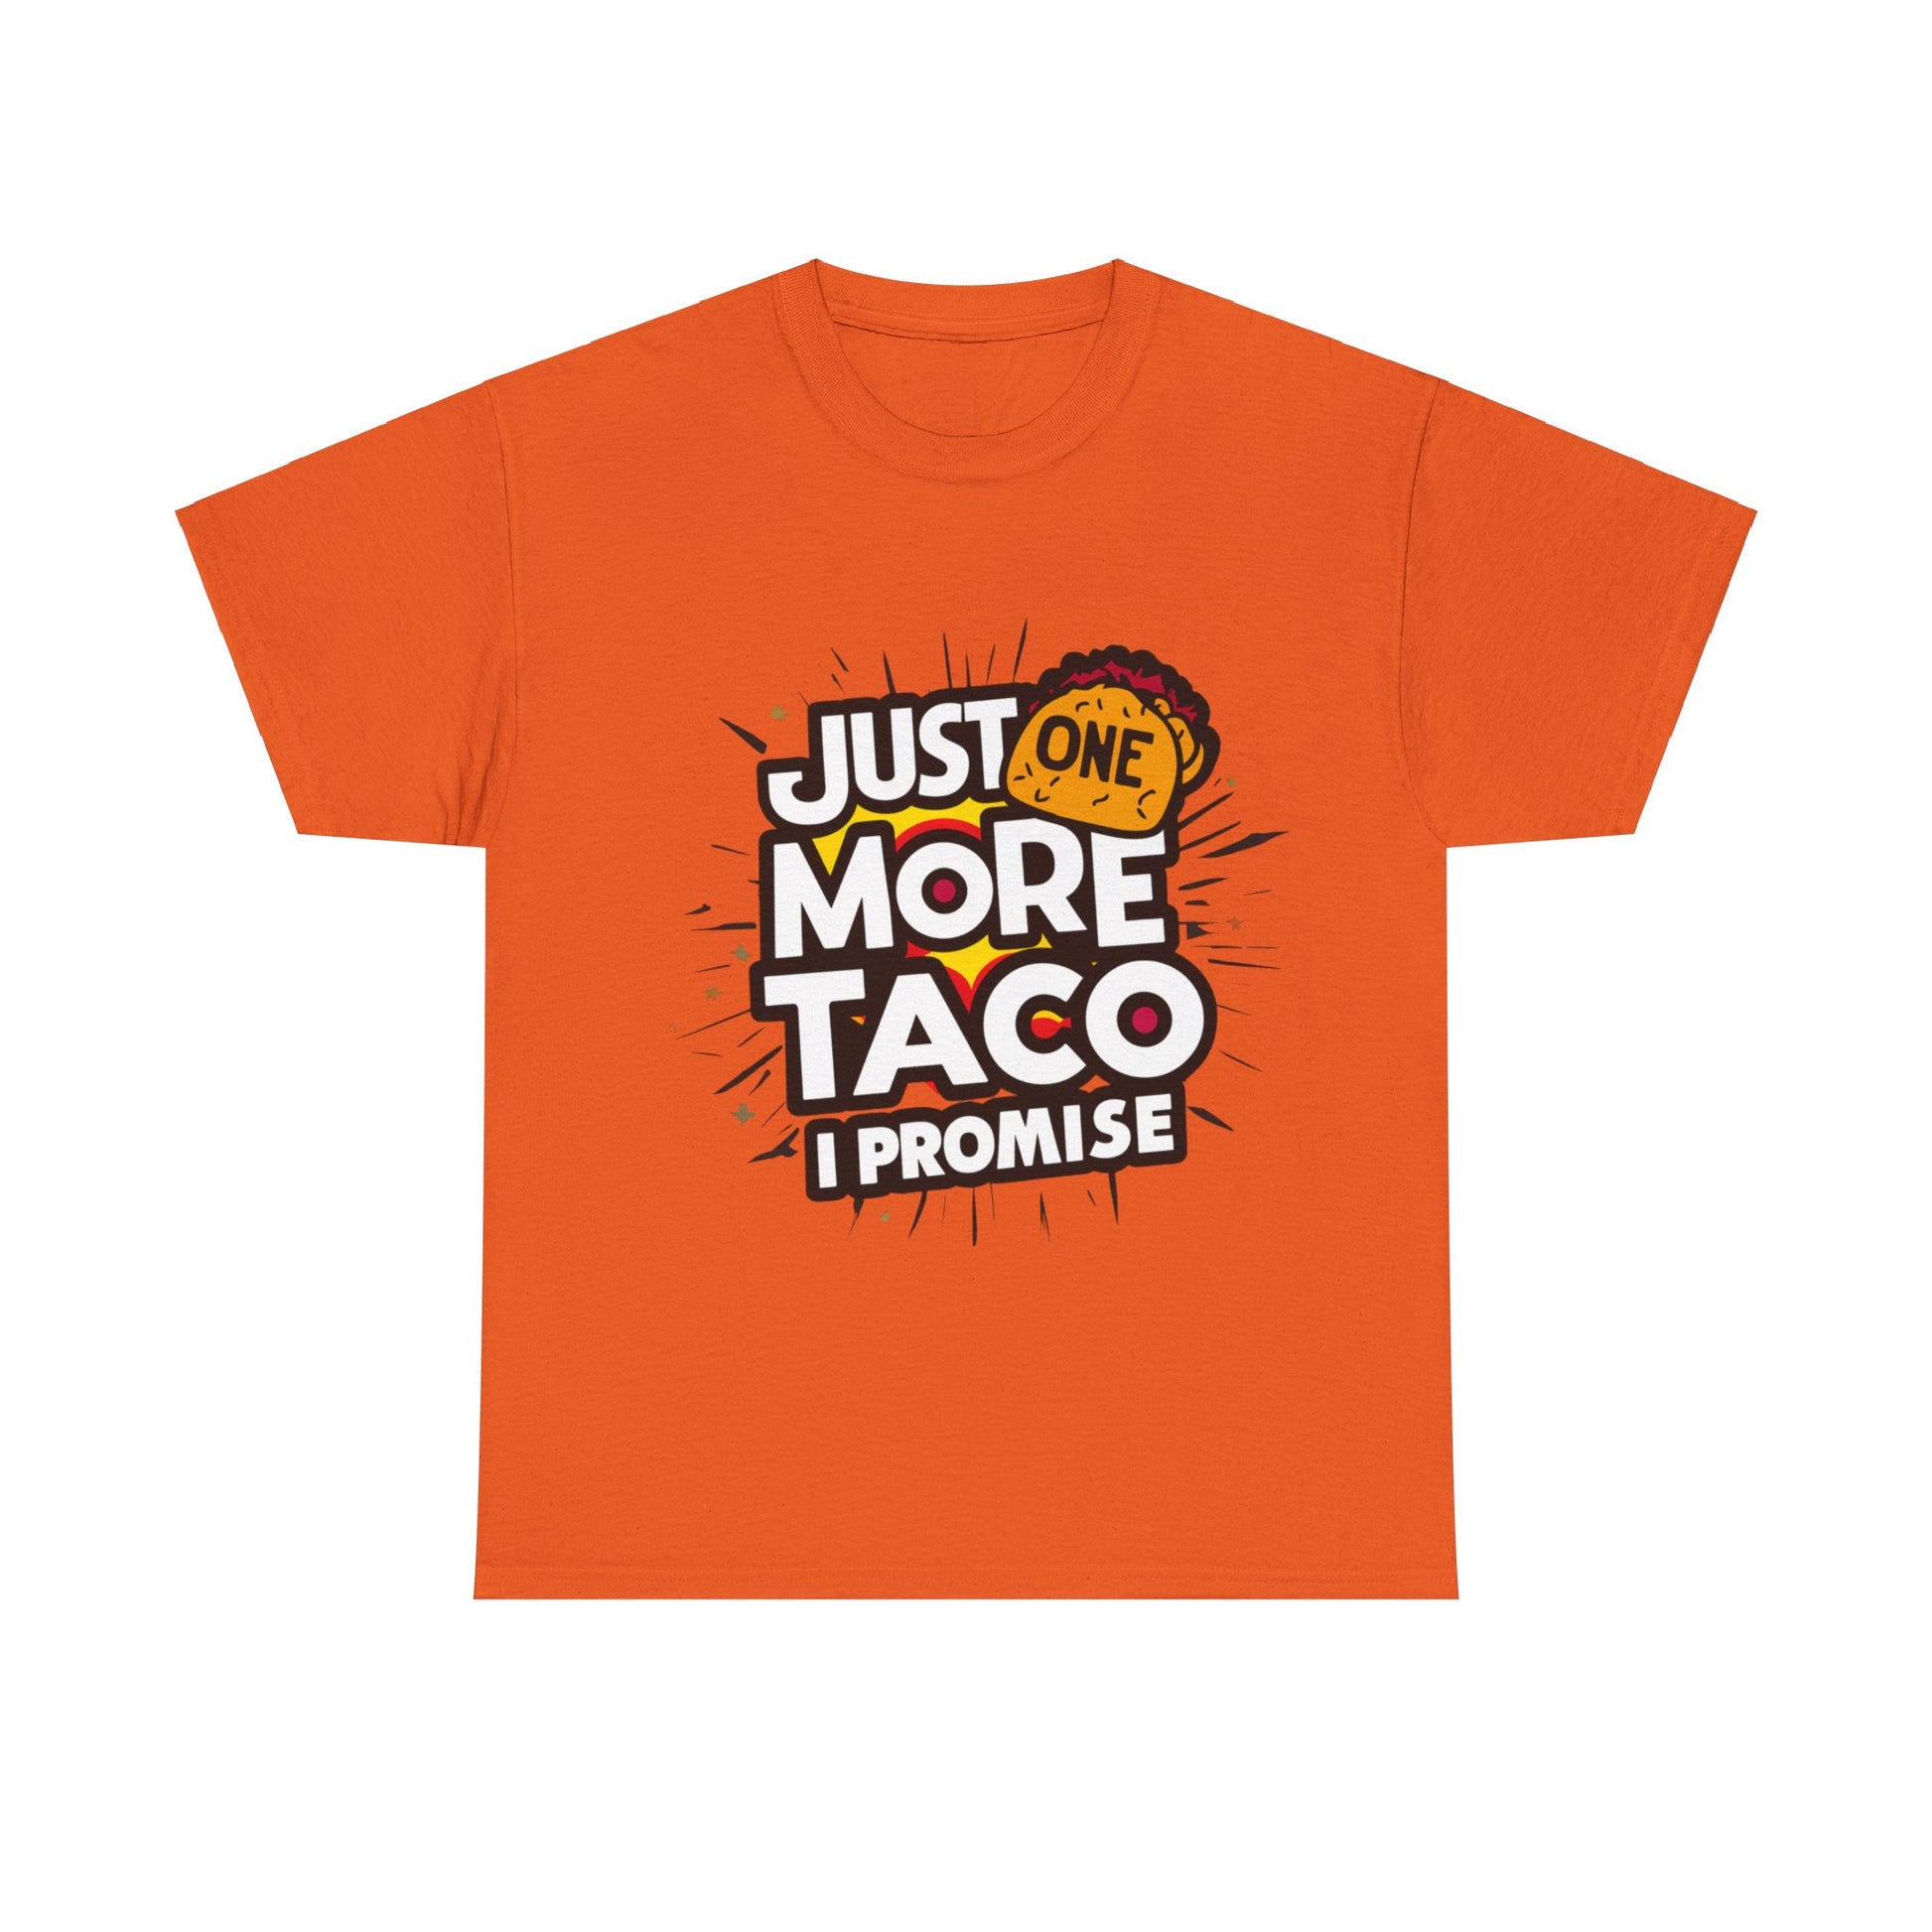 Copy of Just One More Taco I Promise Mexican Food Graphic Unisex Heavy Cotton Tee Cotton Funny Humorous Graphic Soft Premium Unisex Men Women Orange T-shirt Birthday Gift-6